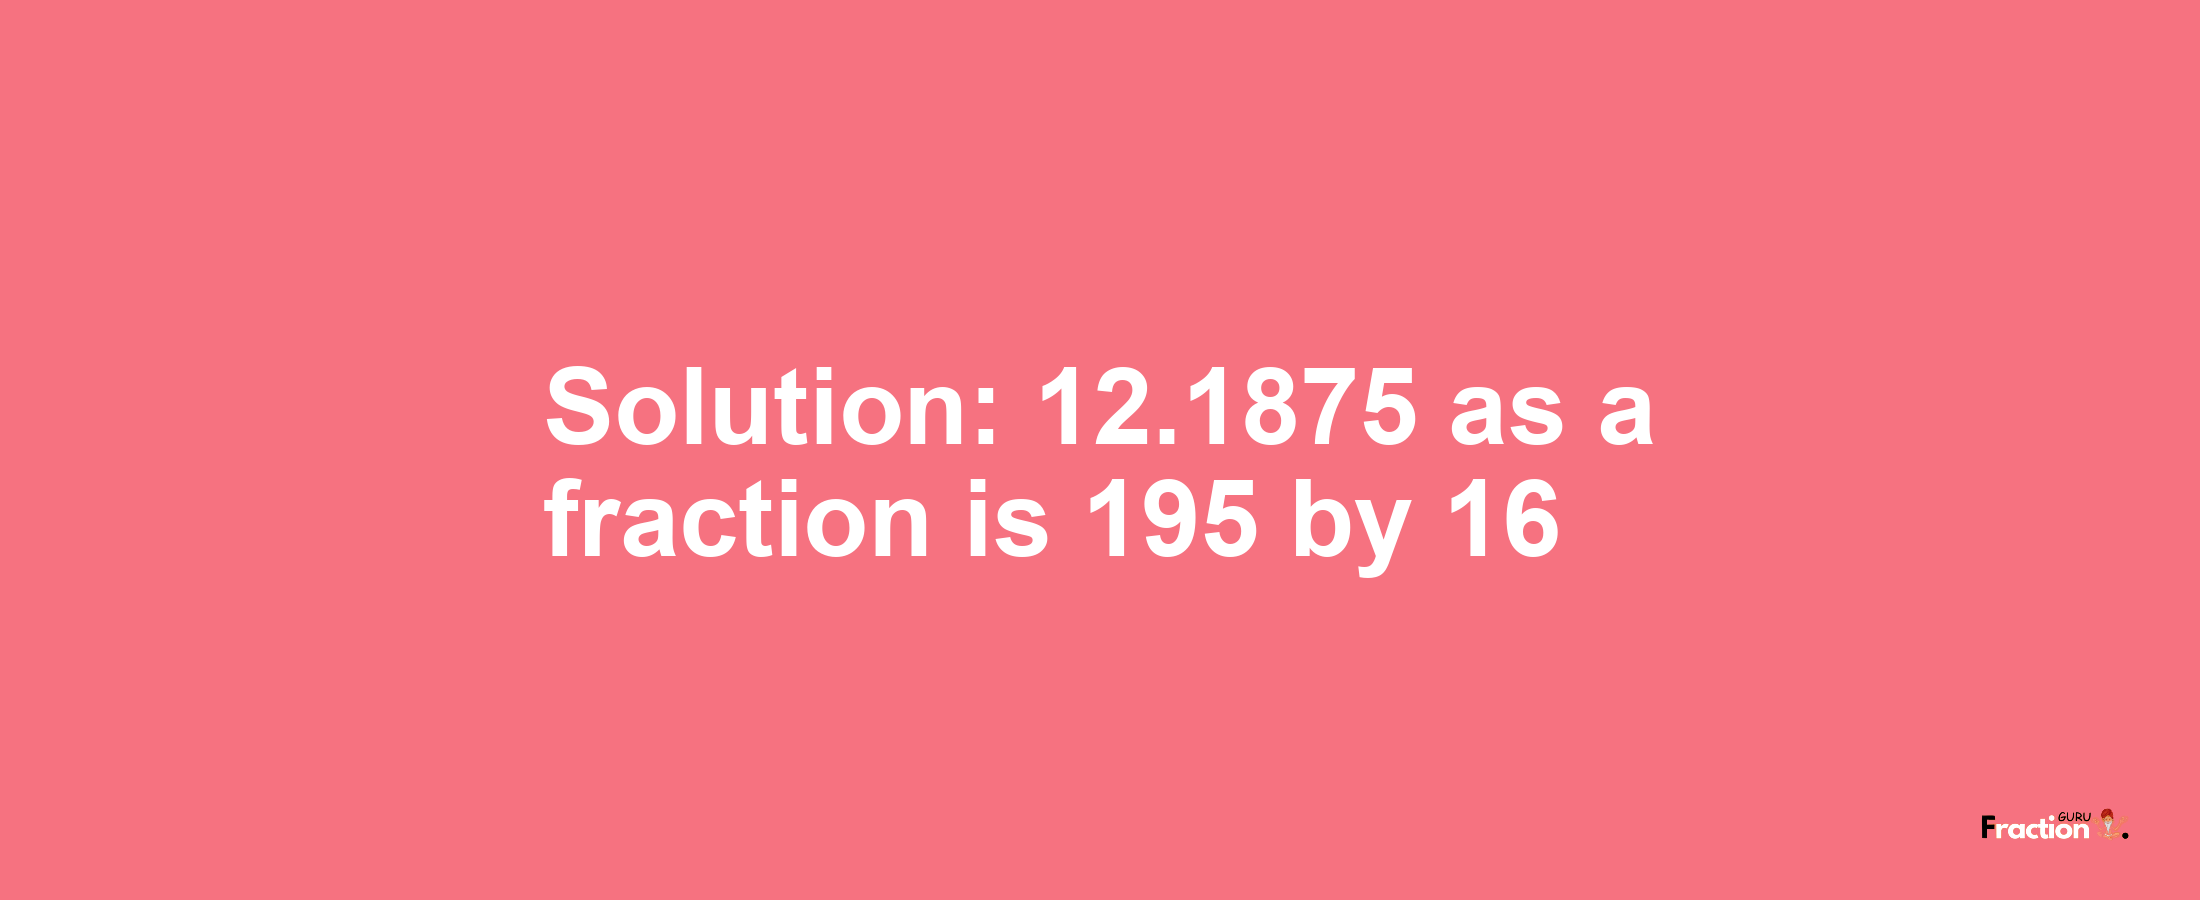 Solution:12.1875 as a fraction is 195/16